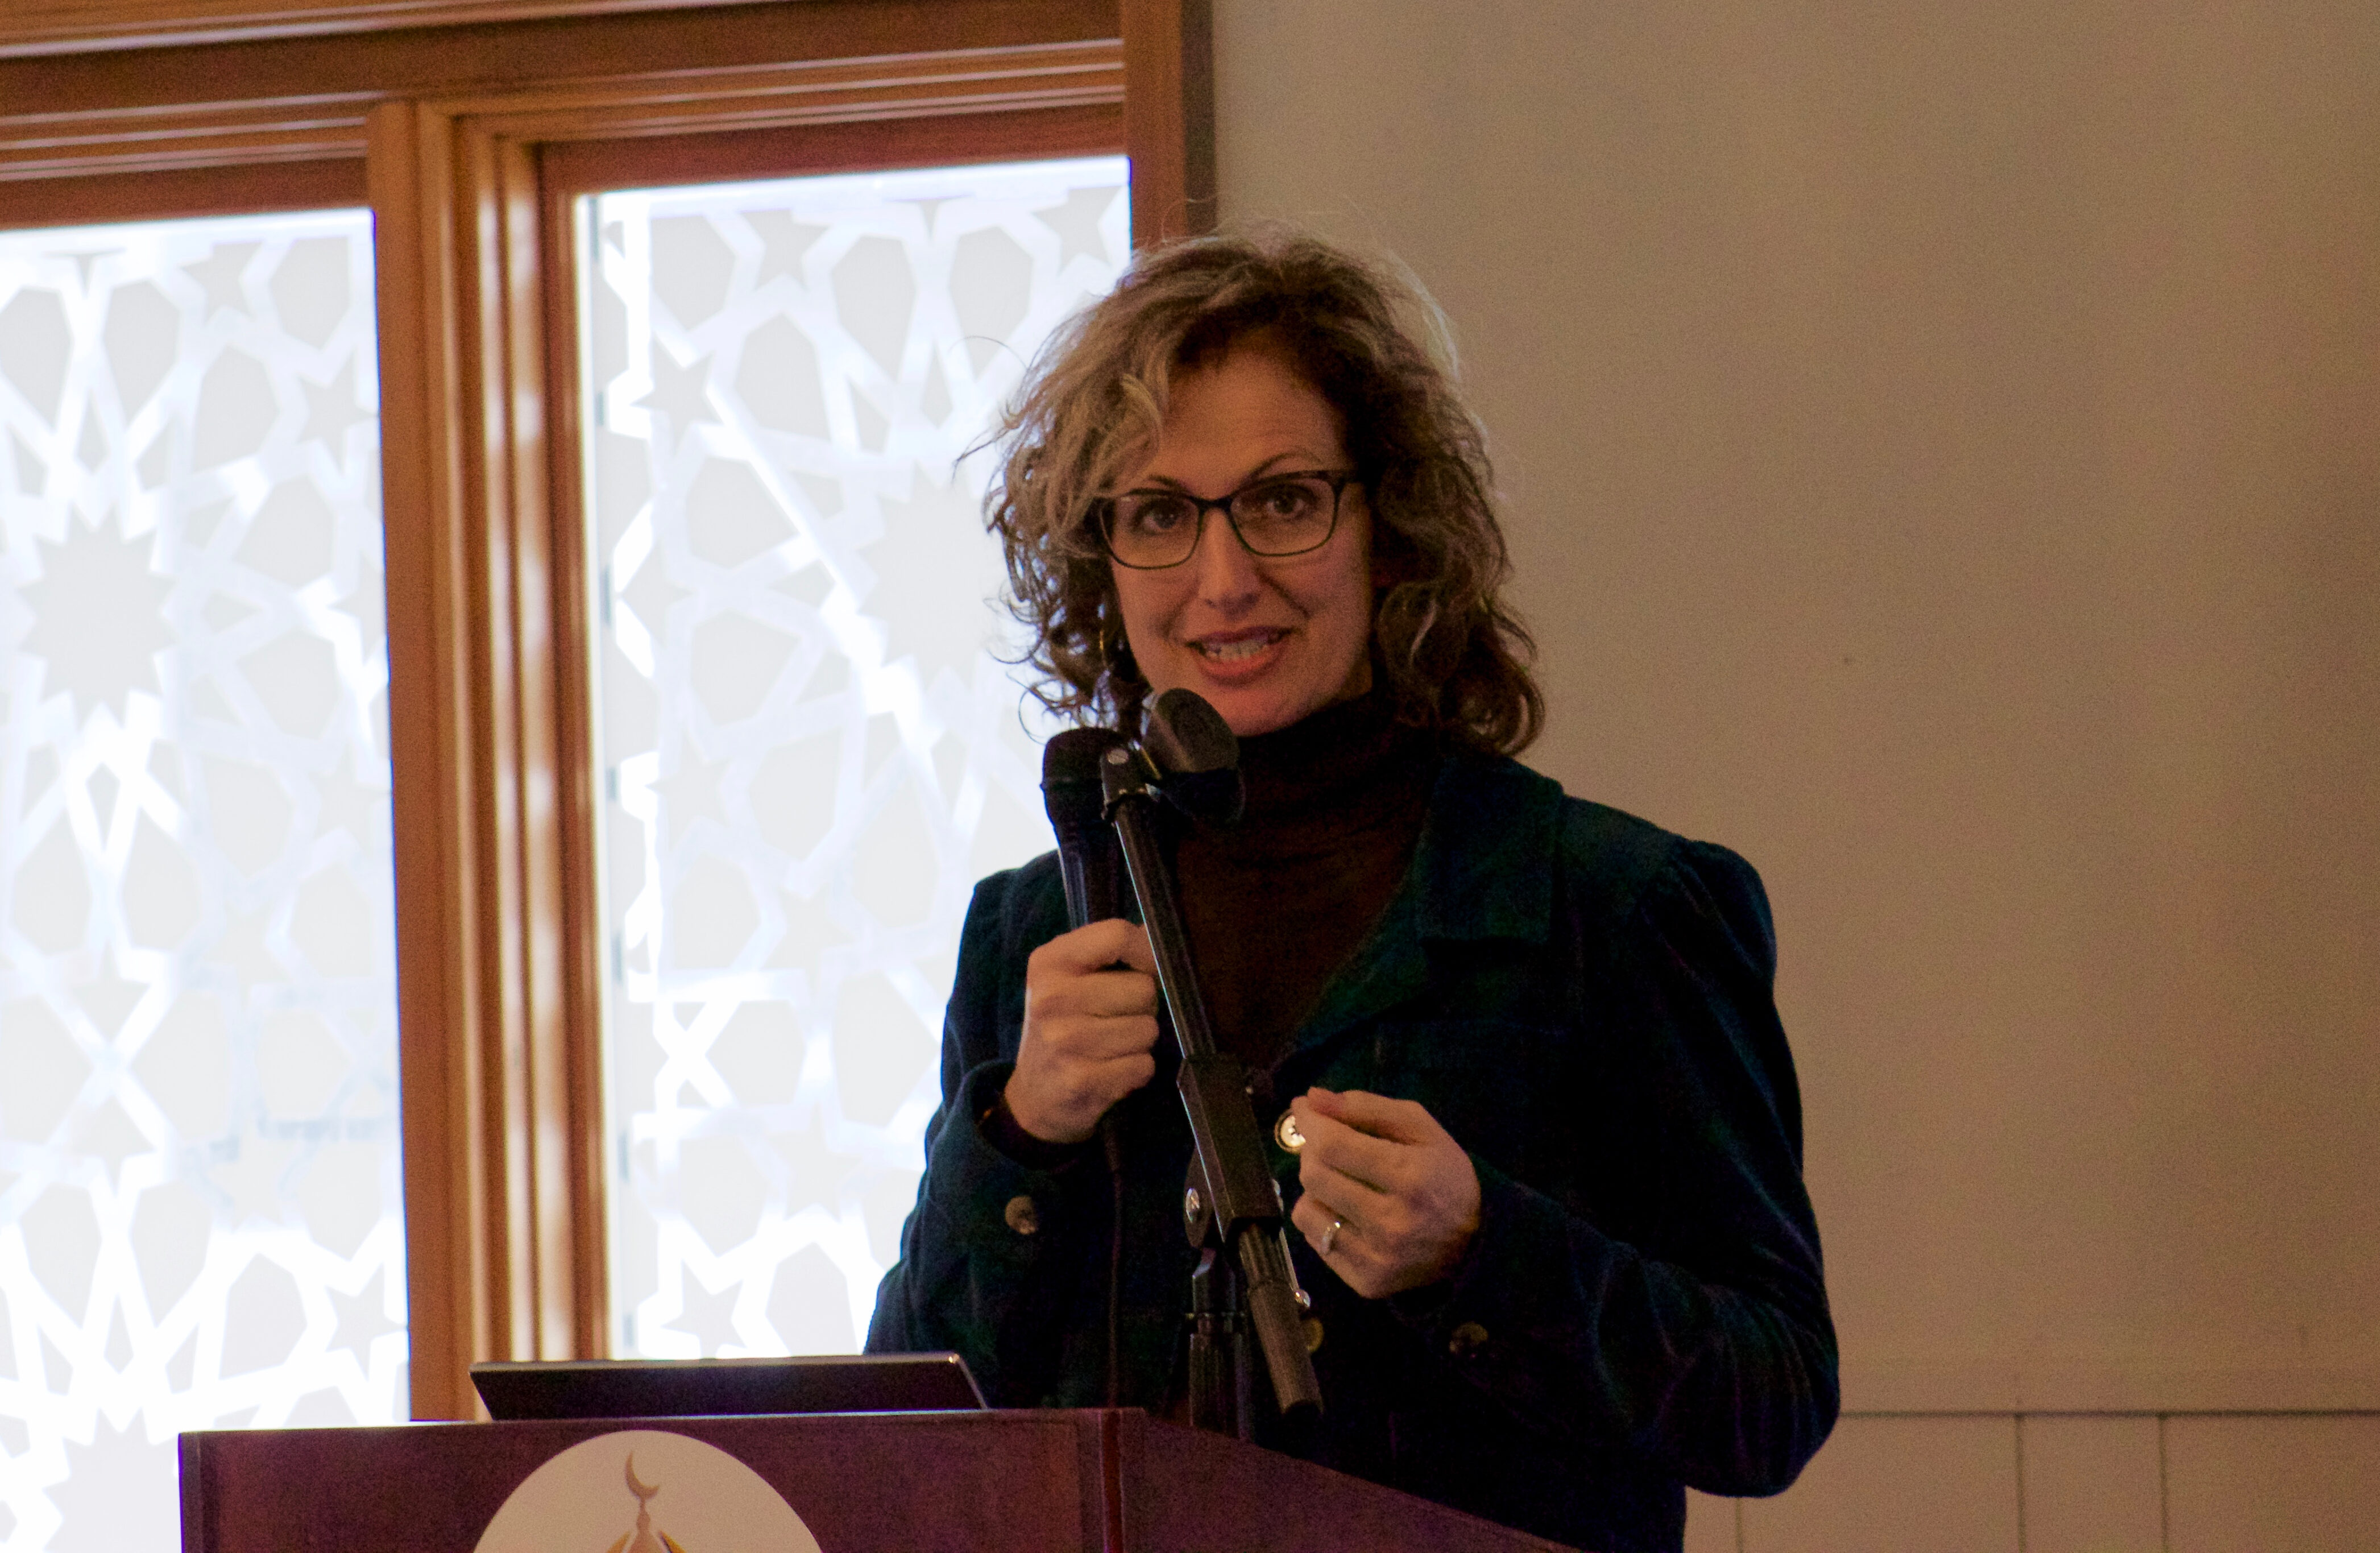 MCCFAD Director Dr. Kristine Ajrouch speaks to community members at the Islamic Institute of America in Dearborn Heights, Saturday, Feb. 15, 2020. Photo: Hassan Abbas/The Arab American News